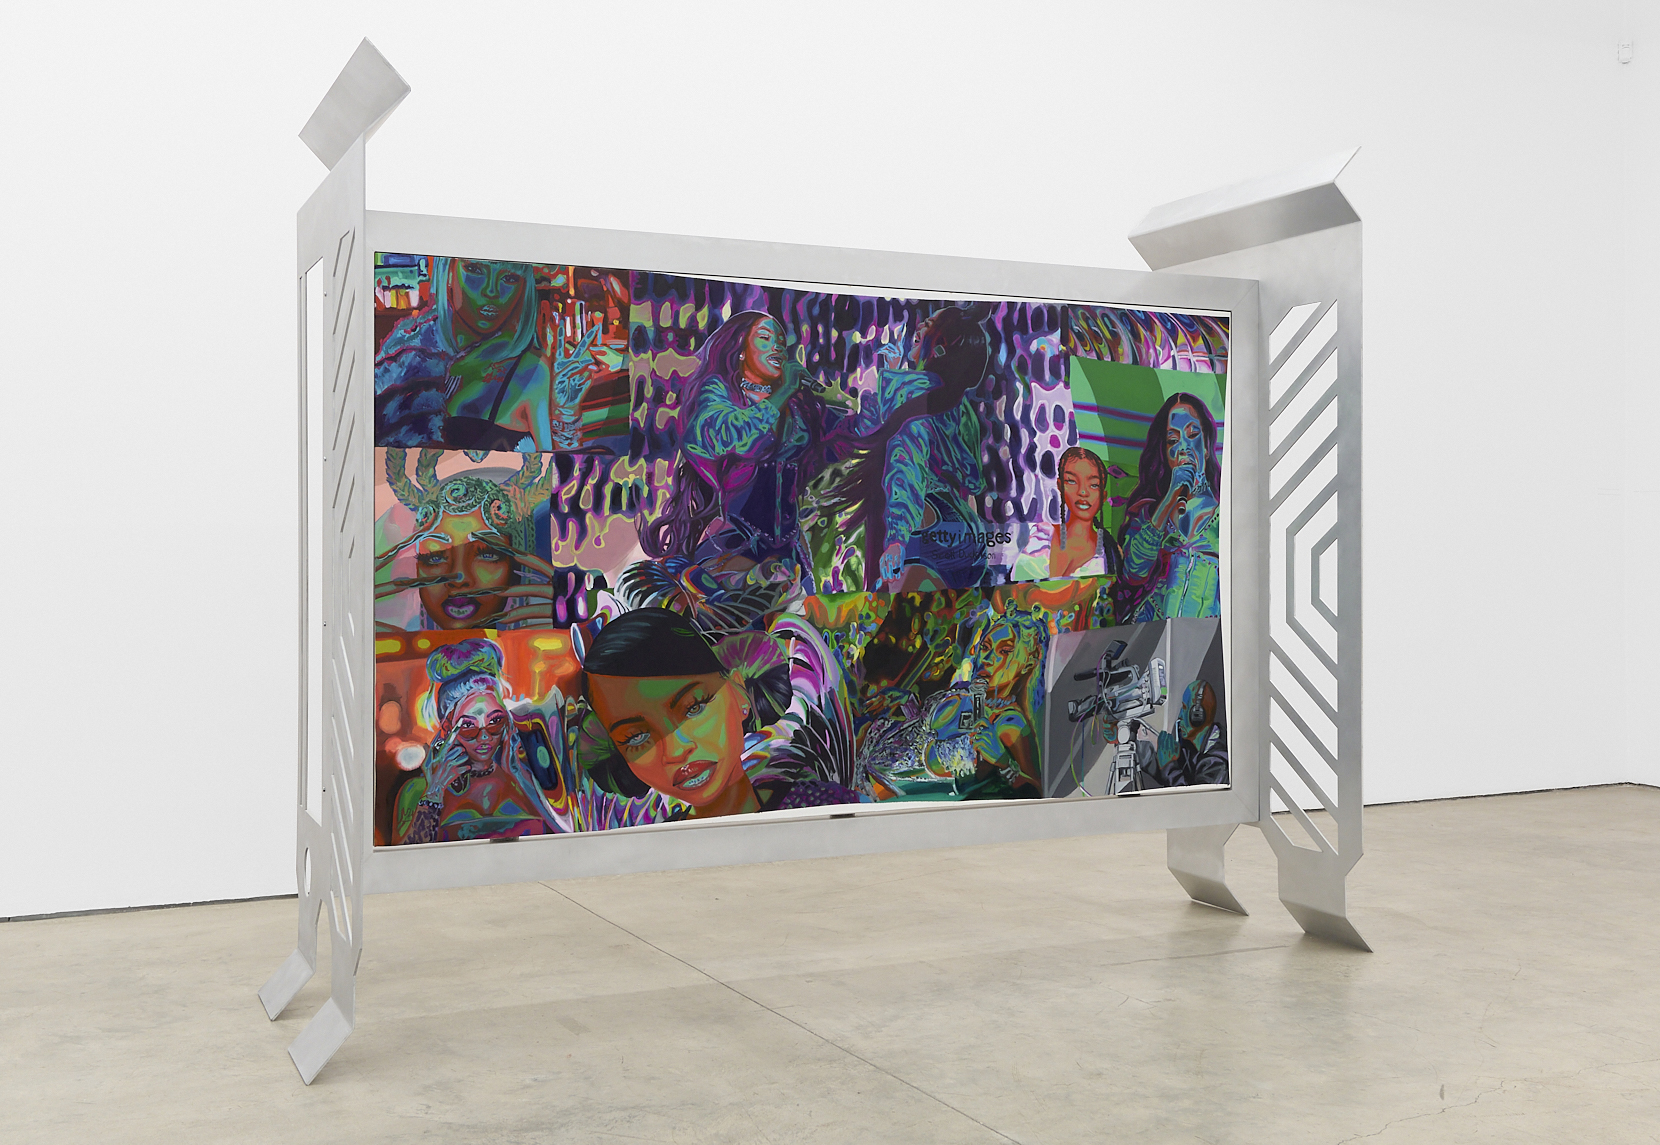 Colorful large painting with multiple figures mounted inside a metal futuristic freestanding frame